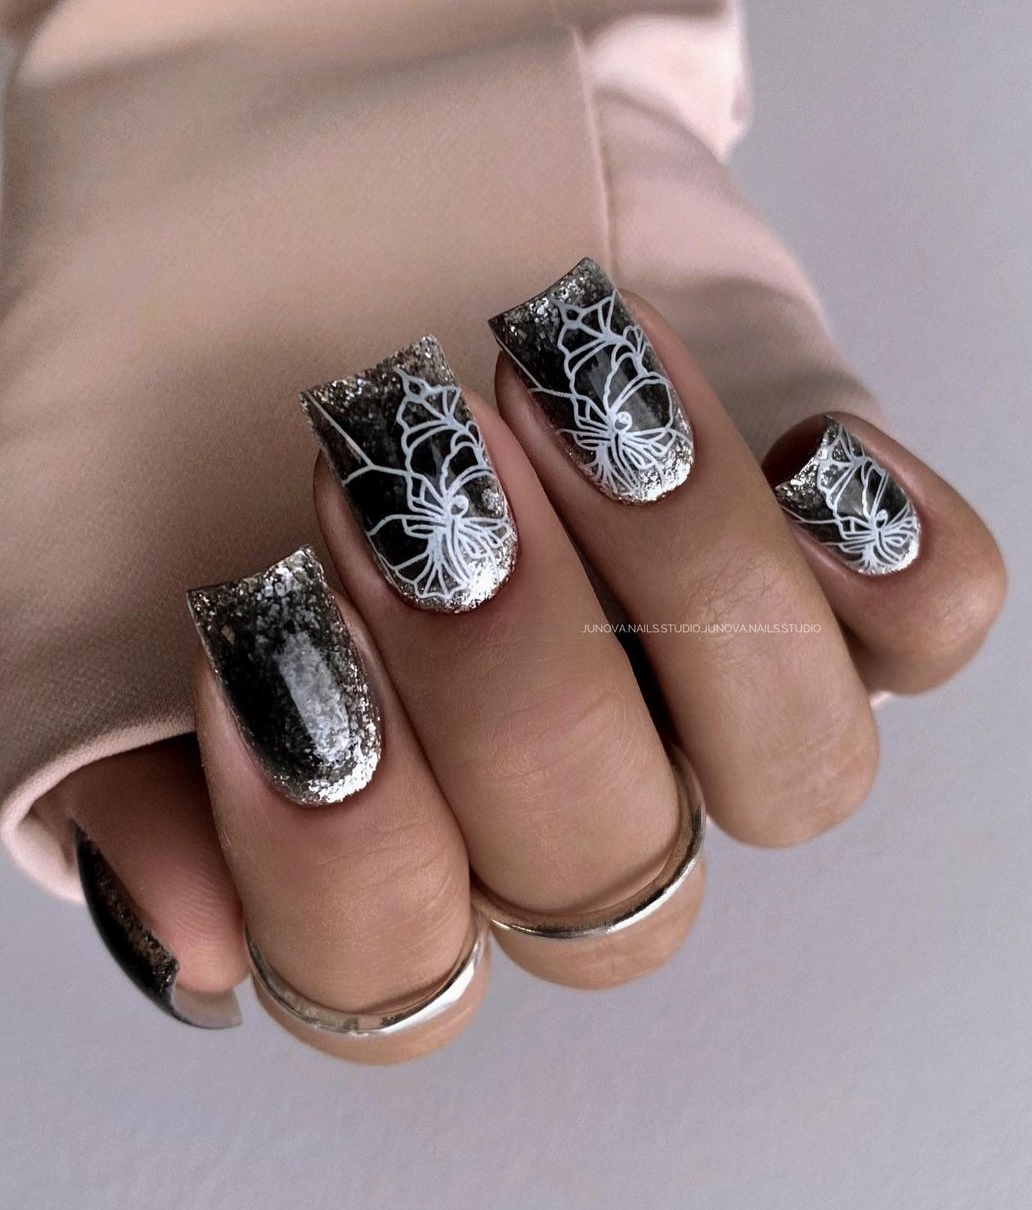 Square Black Nails with Glitter and White Floral Design